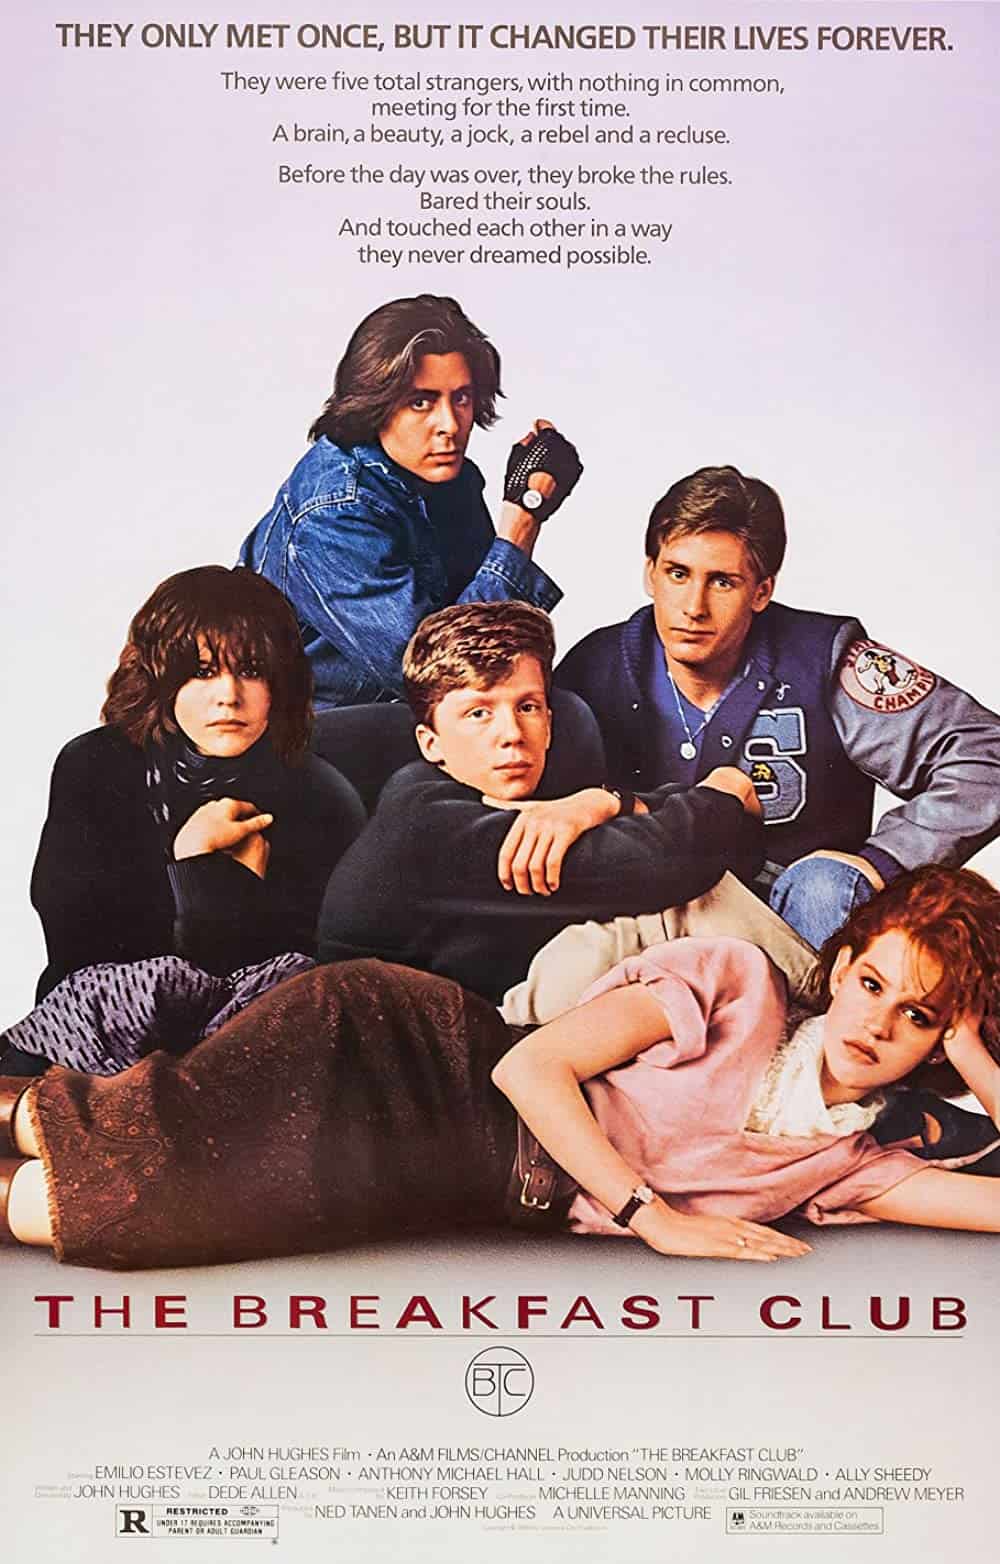 The Breakfast Club (1985) Cult Movies You Should Binge-Watch this Holiday